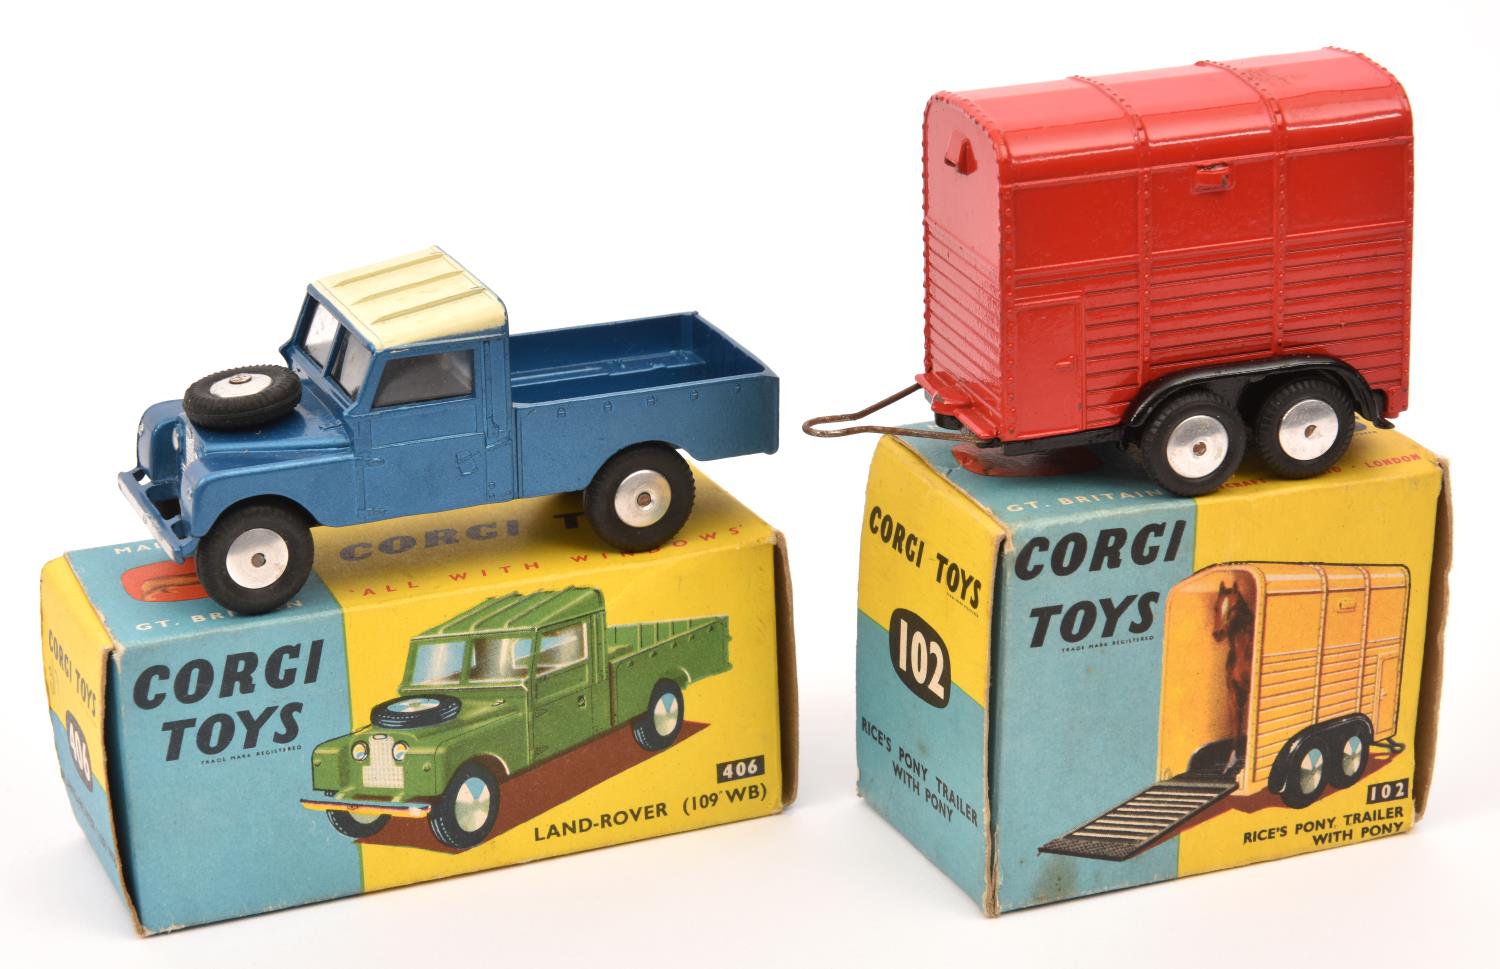 2 Corgi Toys. Land Rover (109' WB) (406). An example in metallic blue with cream roof and smooth